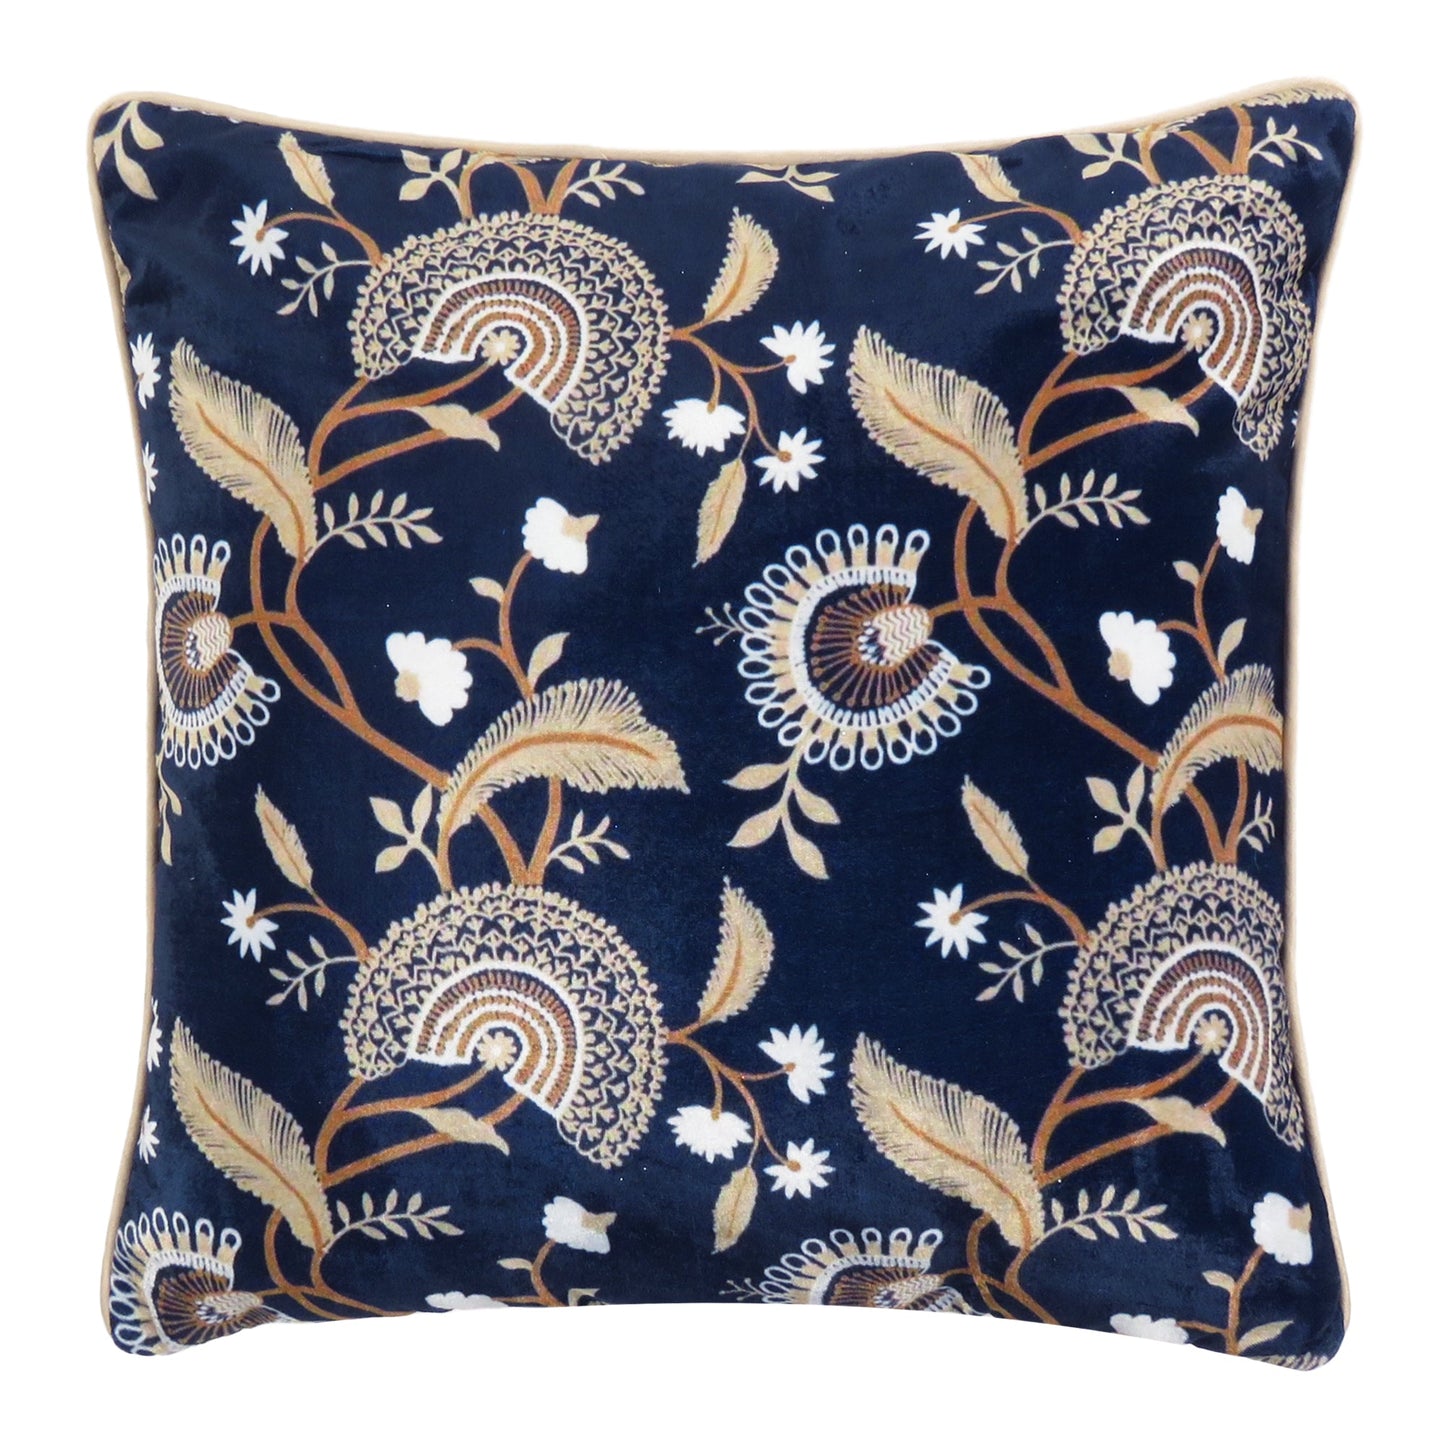 Velvet Polydupion Printed Cushion Covers in Set of 2 - Blue & Gold